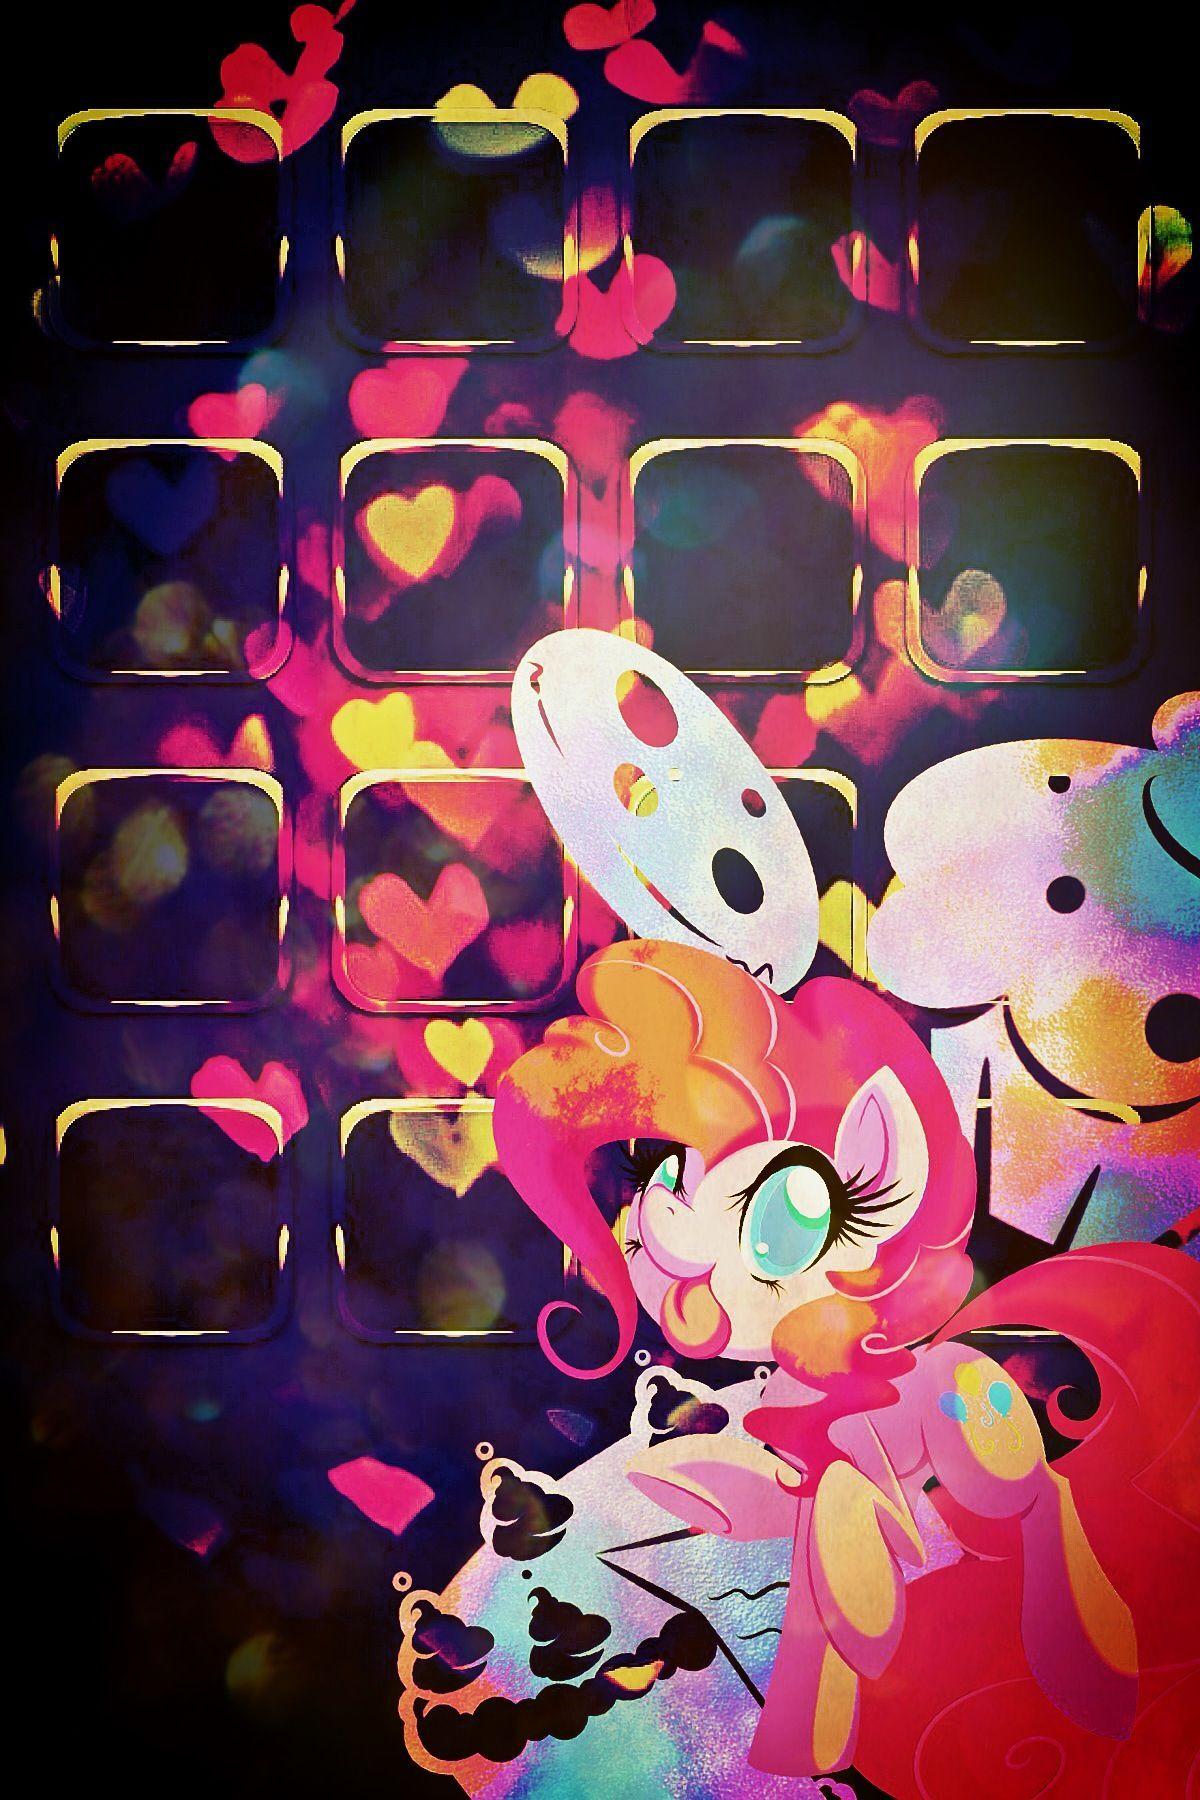 An iPhone background for some. my little pony. Pinkie